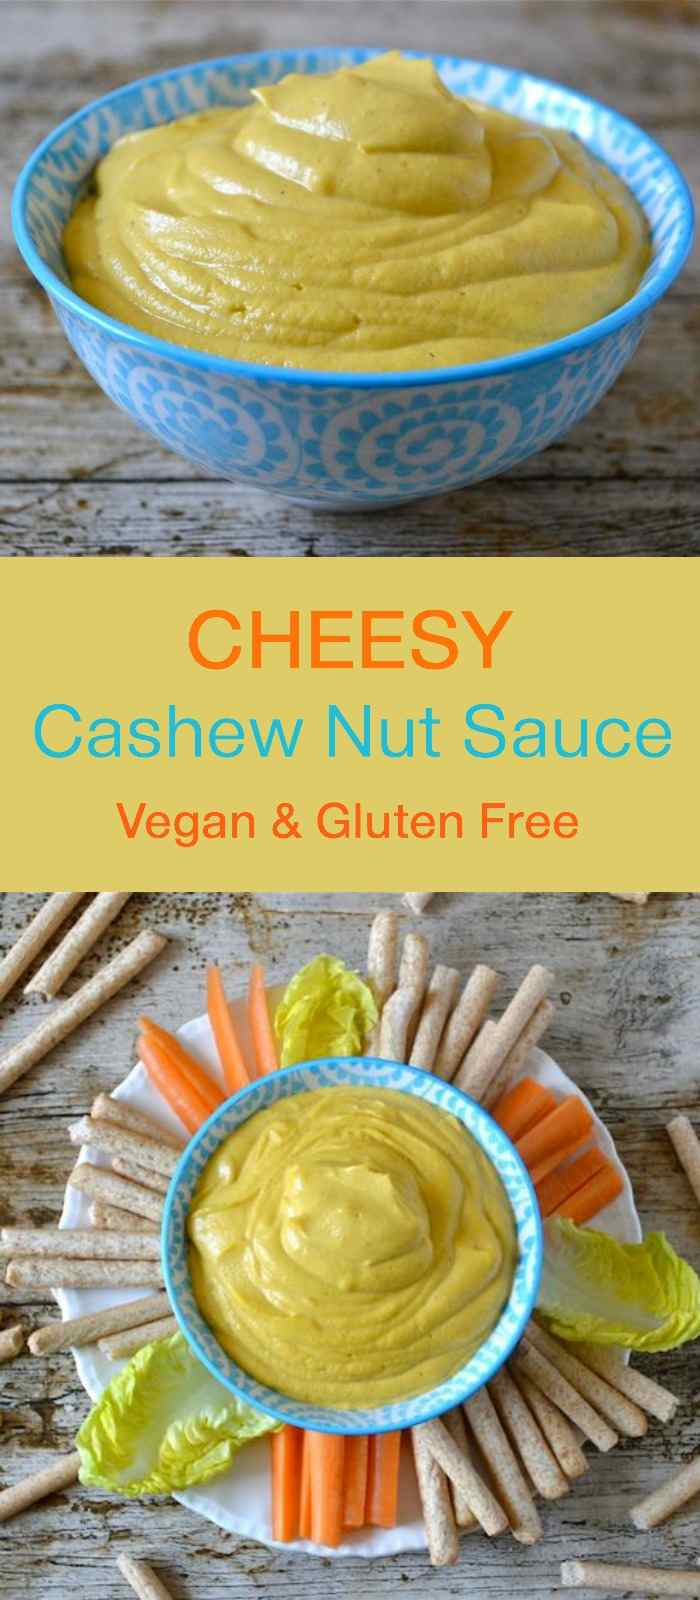 Two images of vegan and gluten-free cheesy cashew nut sauce (or dip) in a bowl.